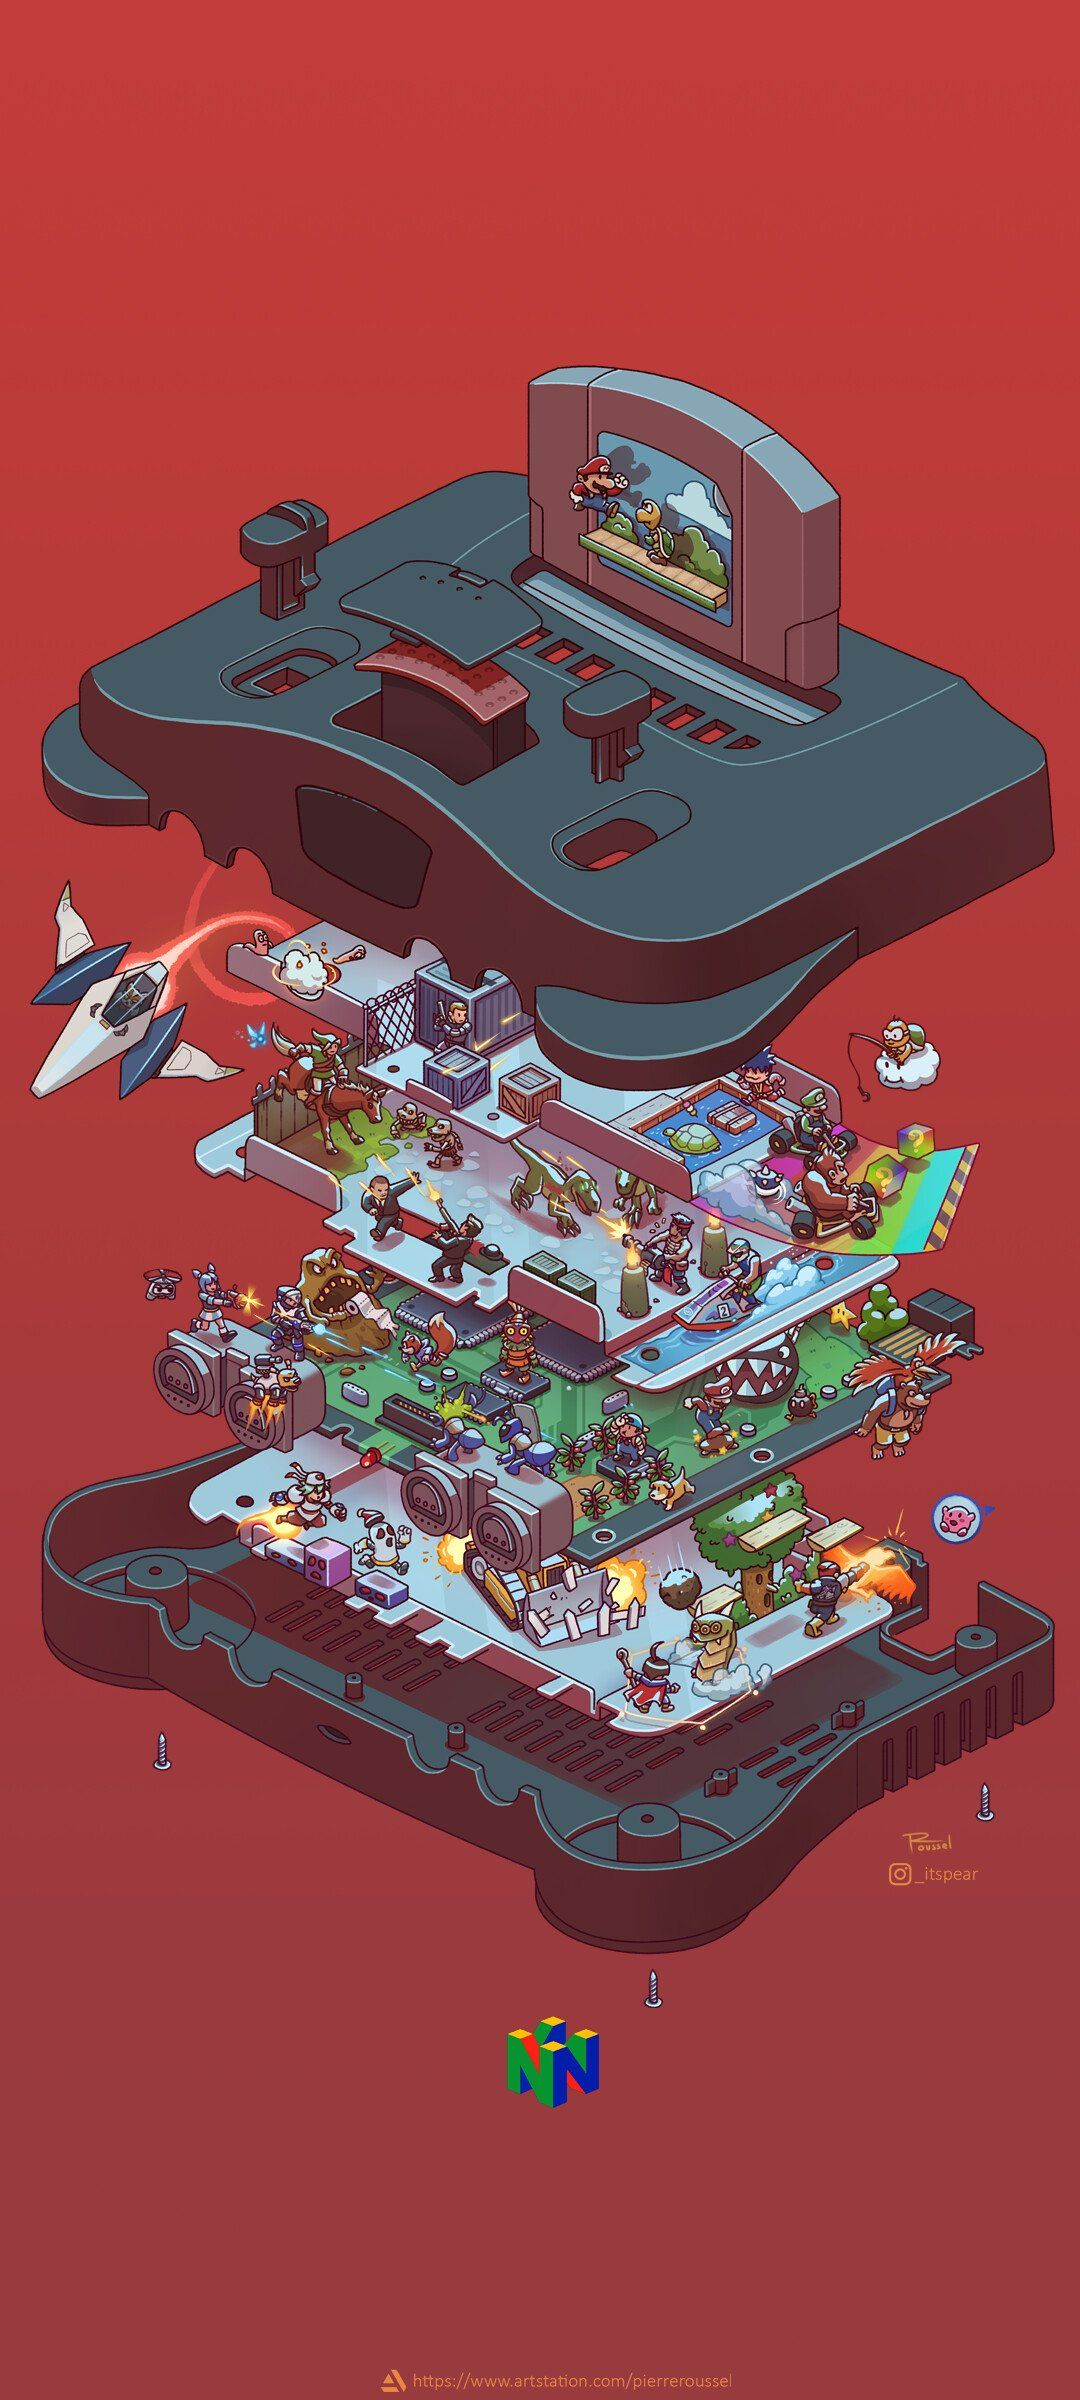 1080x2400 THE ART OF VIDEO GAMES on Twitter | Retro games wallpaper, Retro gaming art, Retro wallpaper